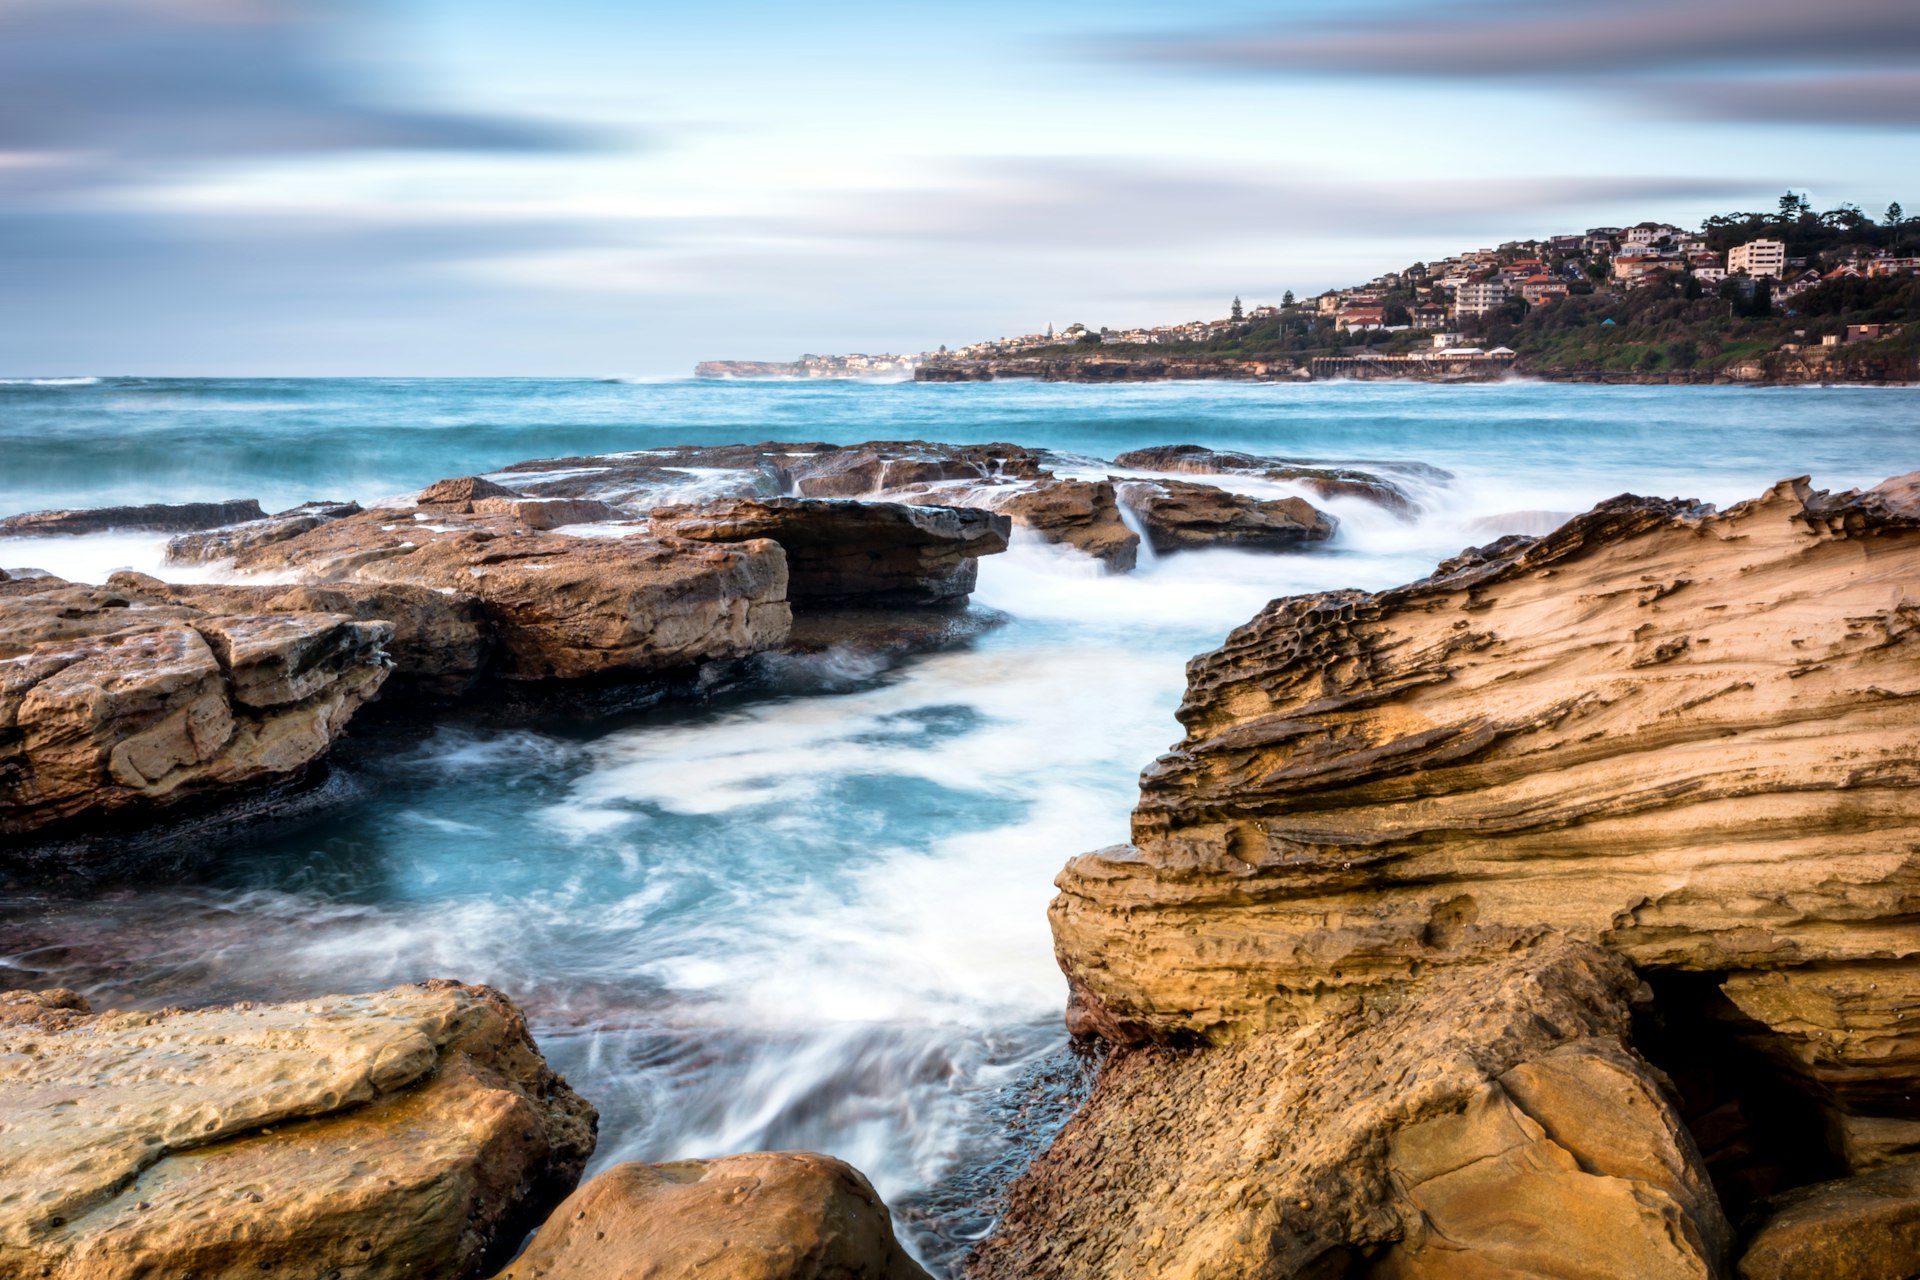 Waves crash on an enclosure of rocks making up Giles Baths at North Coogee Beach in Sydney 